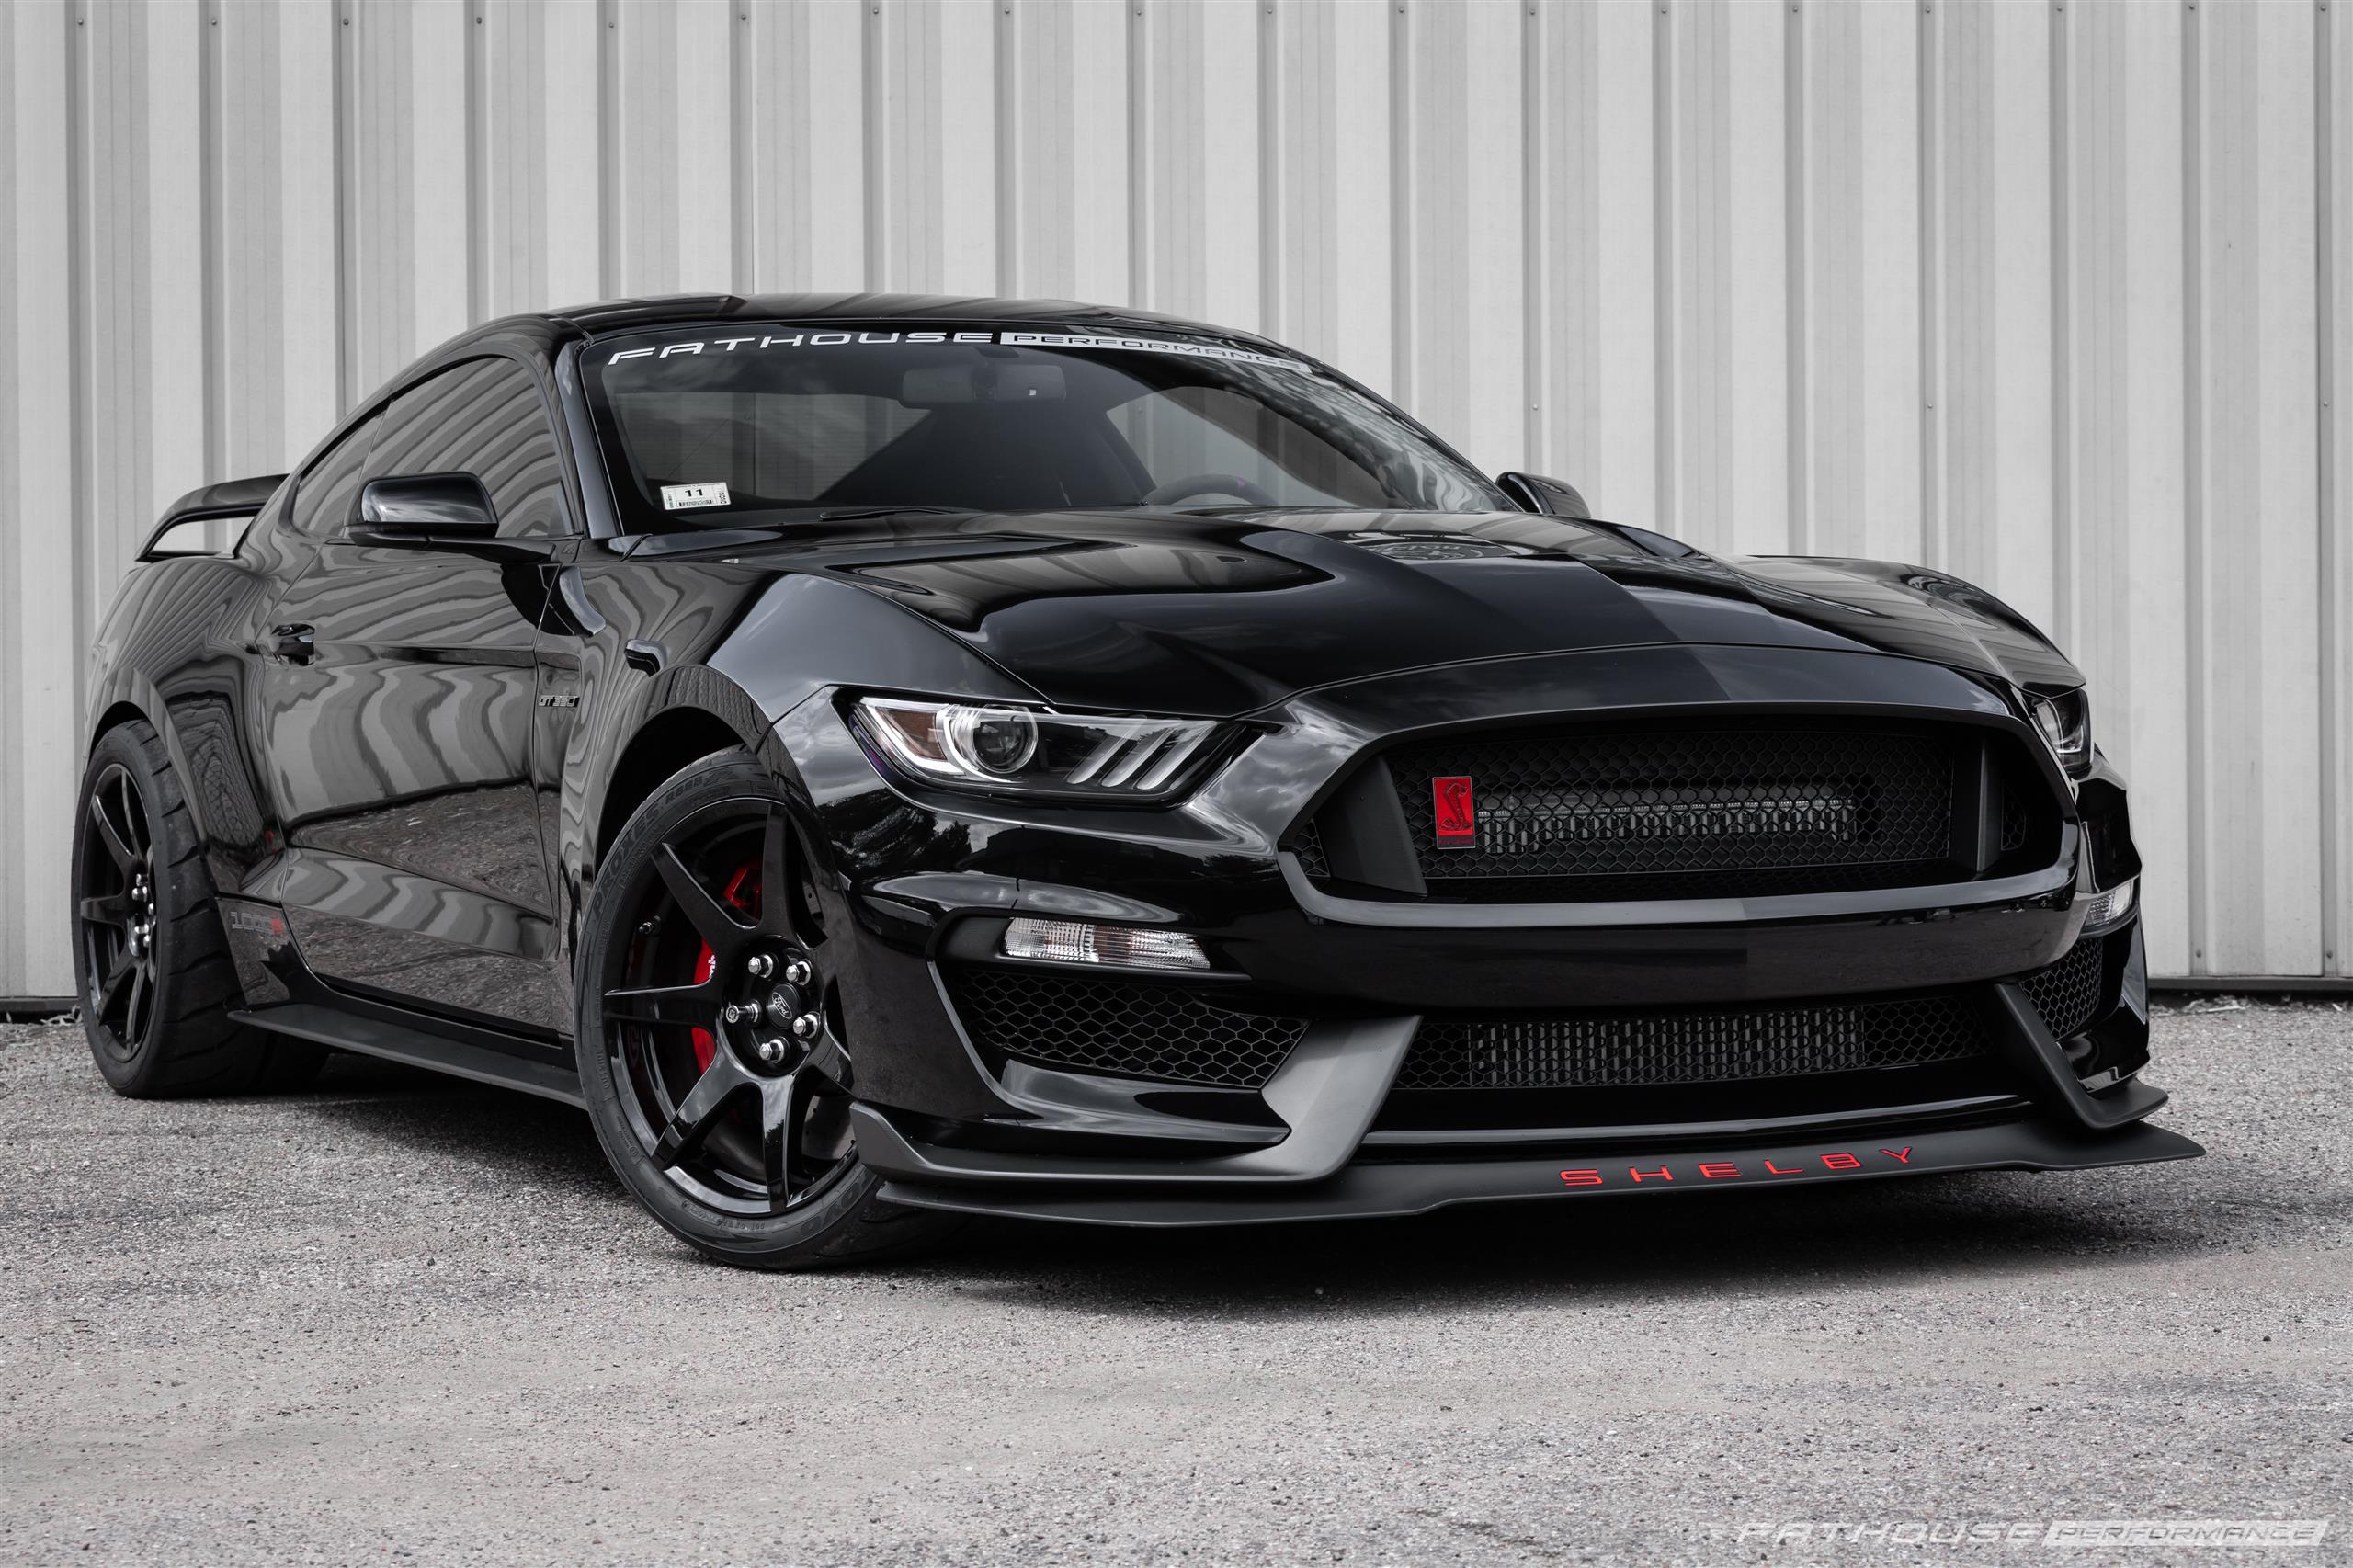 Nazir’s 1000R Shelby GT350 #21